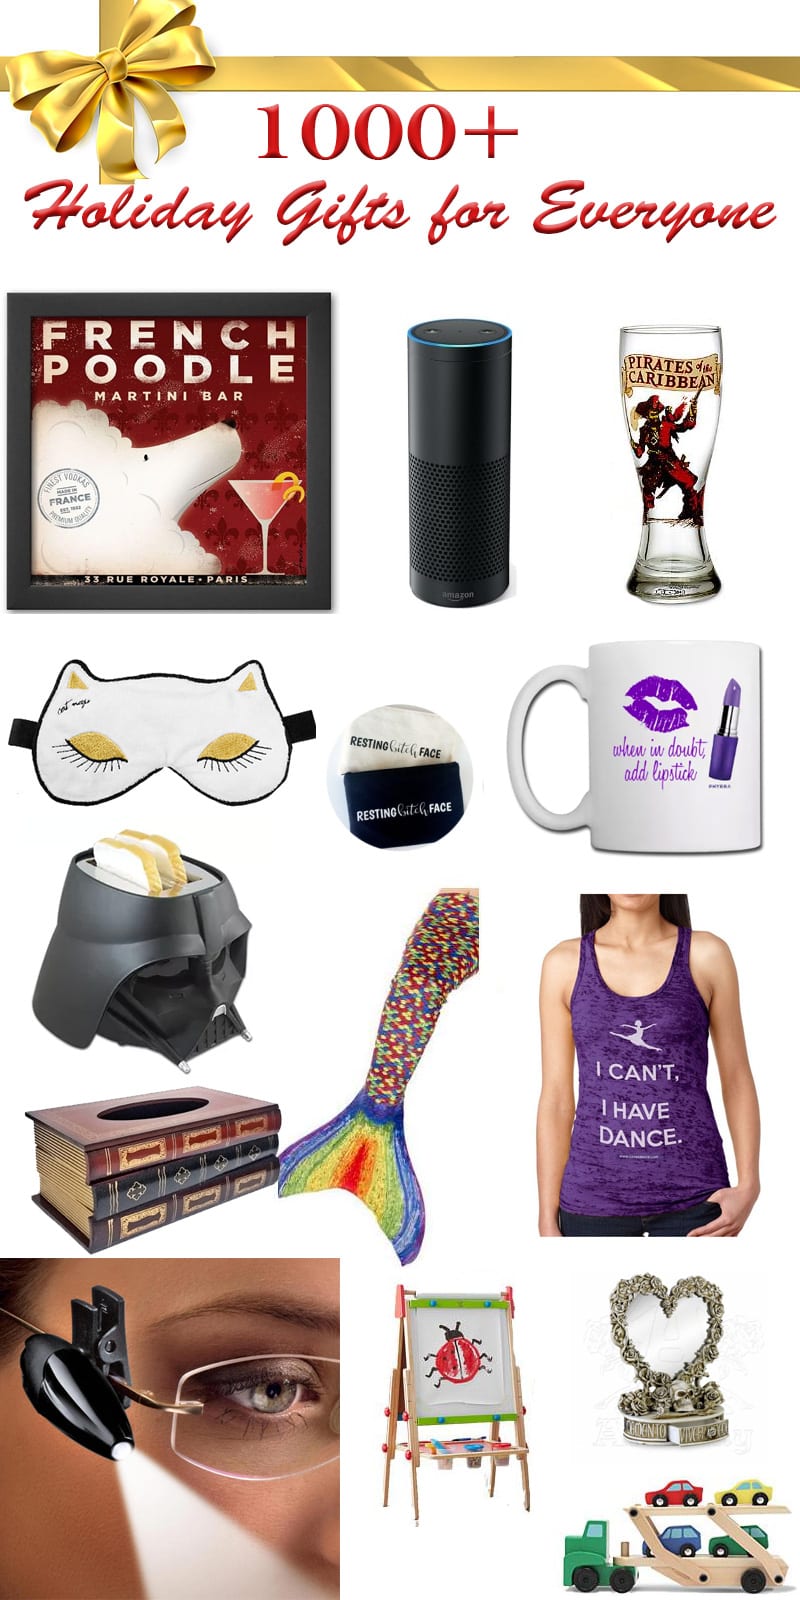 1000+ Gift Ideas for Everyone